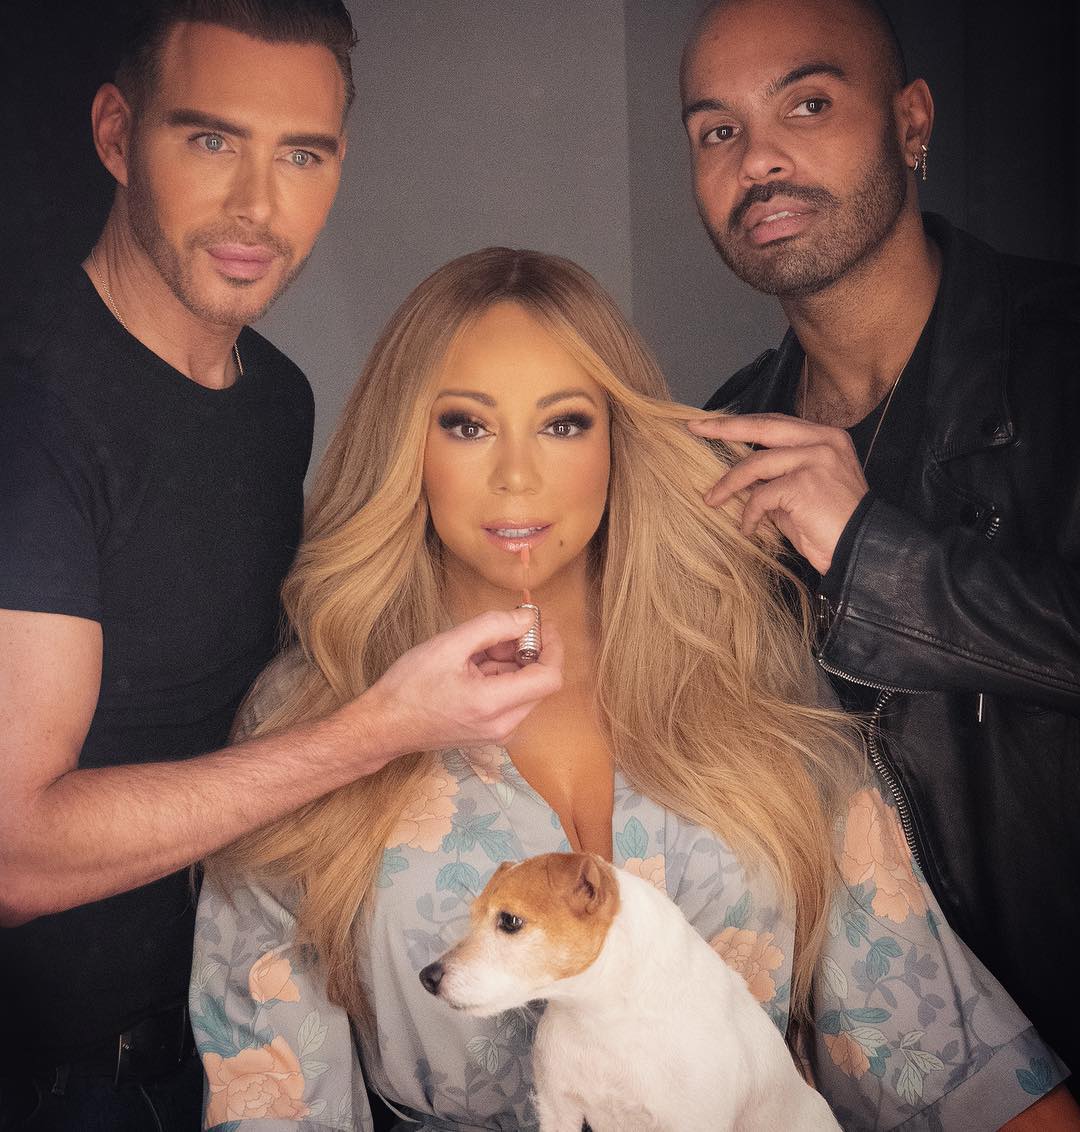 Mariah is surrounded by men